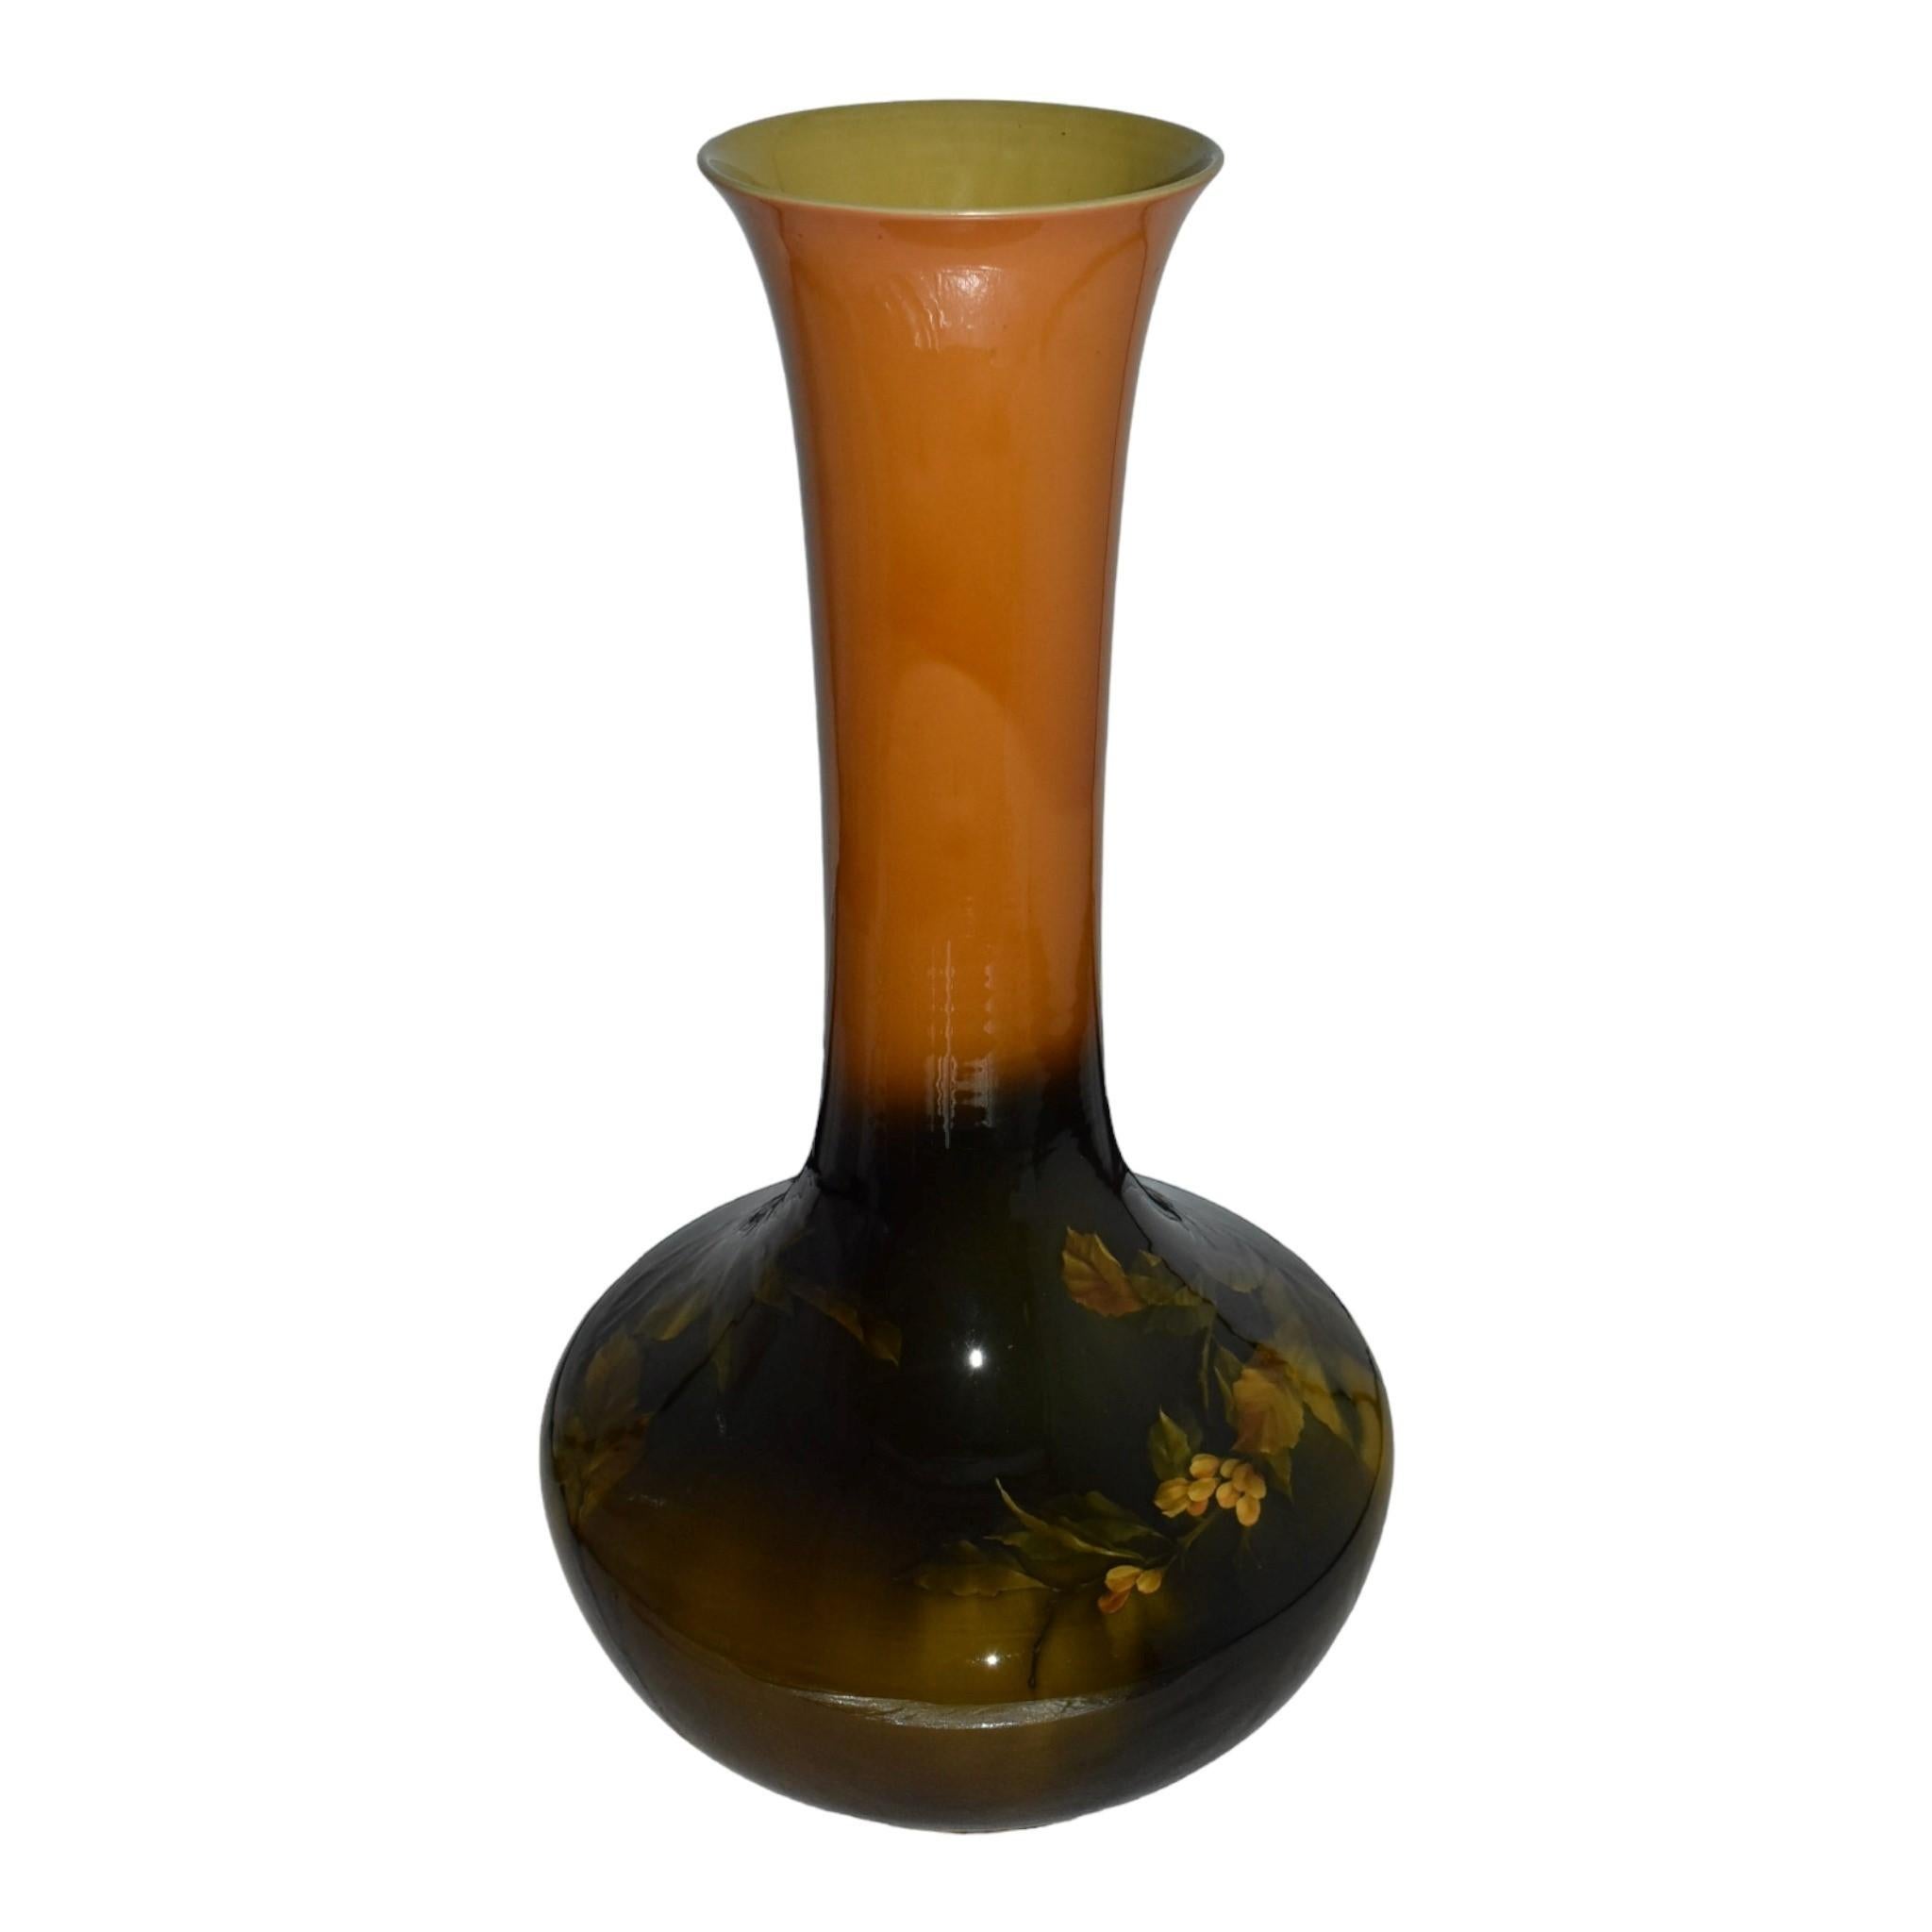 Rookwood 1889 Vintage Art Pottery Hand Painted Ceramic Floor Vase 463A Valentien
Monumental hand-painted standard glaze floor vase with flowers and leaves by Albert Valentien.
It shows very well with a drill hole and tight crack across the base